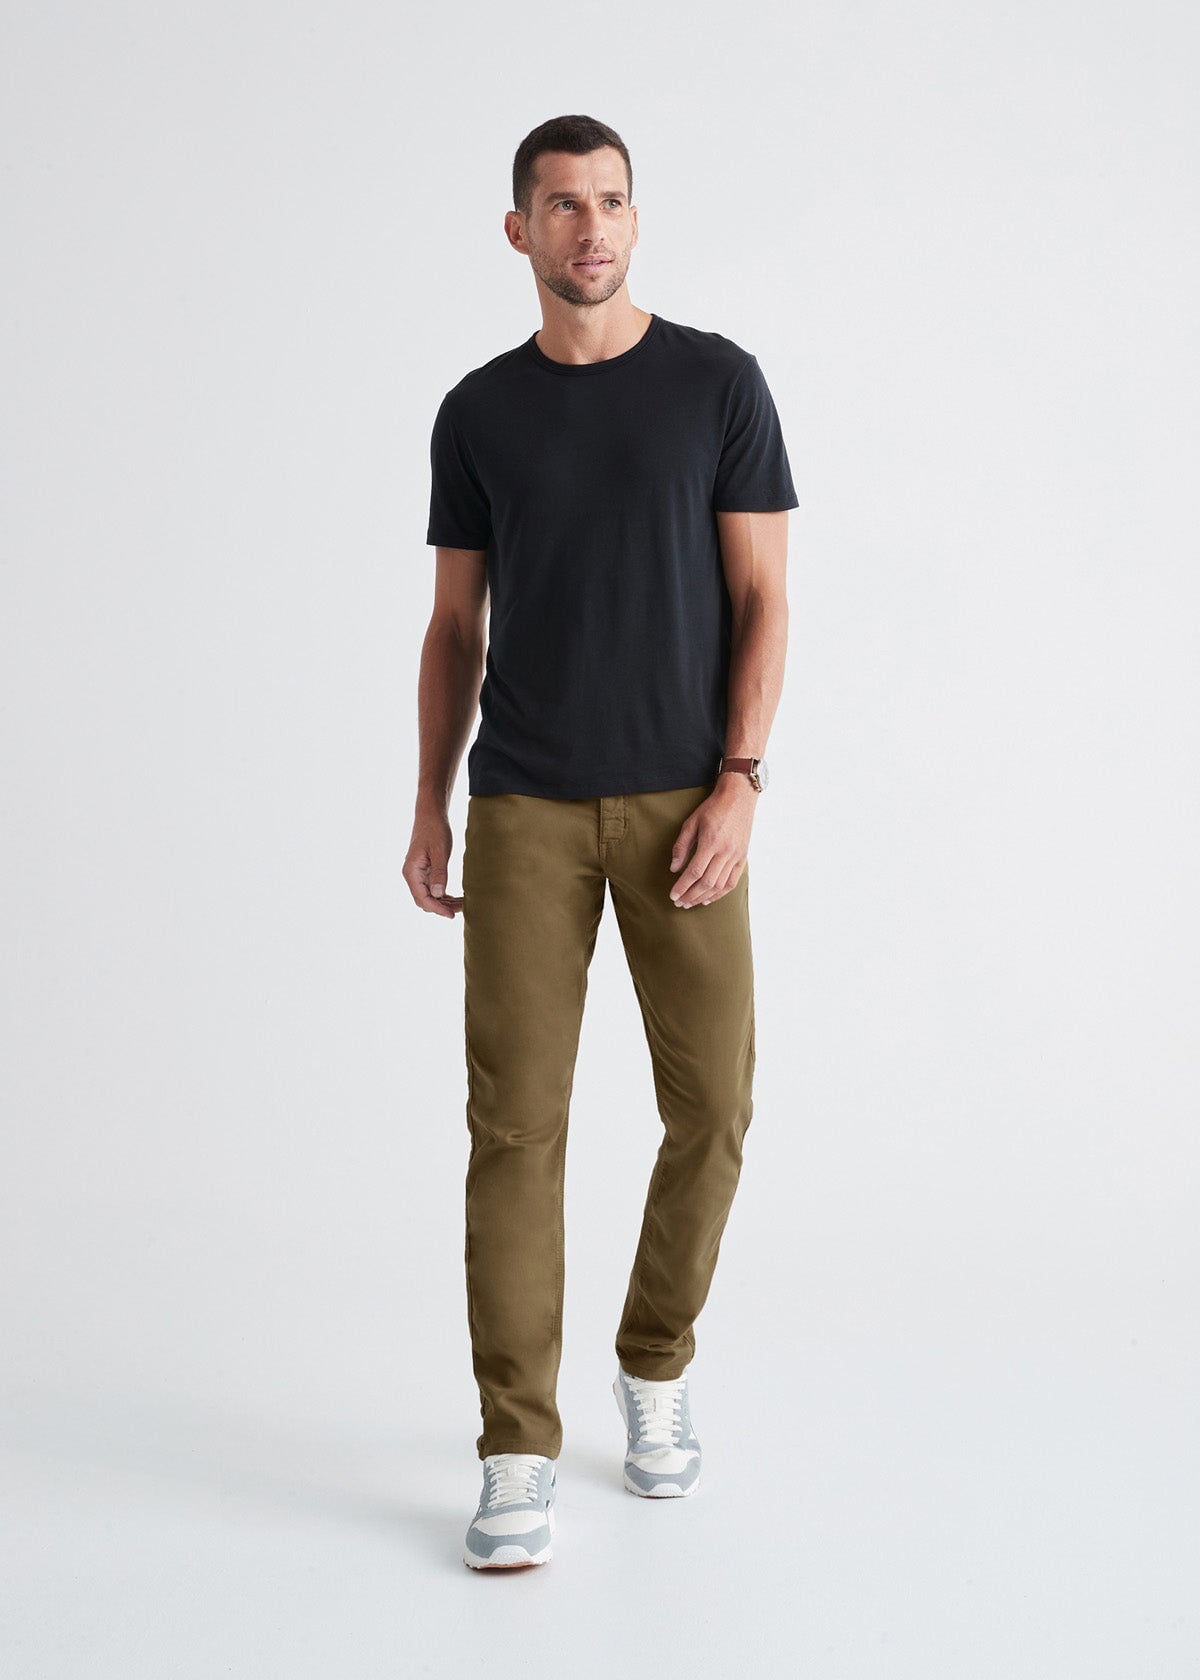 Zuty Tapered Longe Pants Just Dropped and We're Living in Them